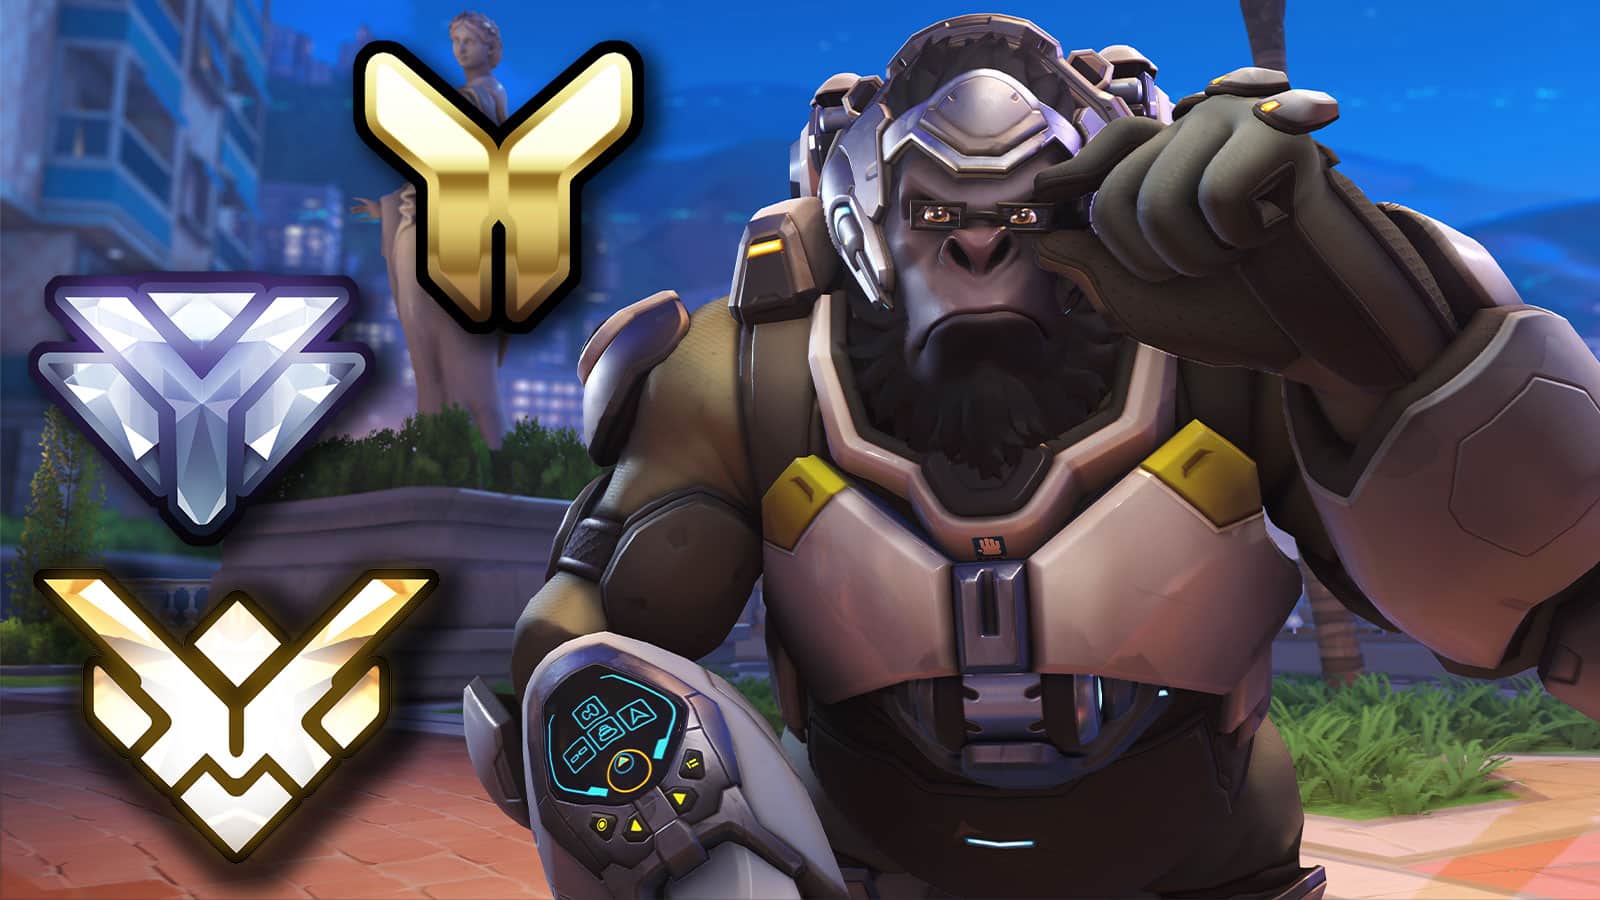 Overwatch 2 Competitive explained, including how to unlock